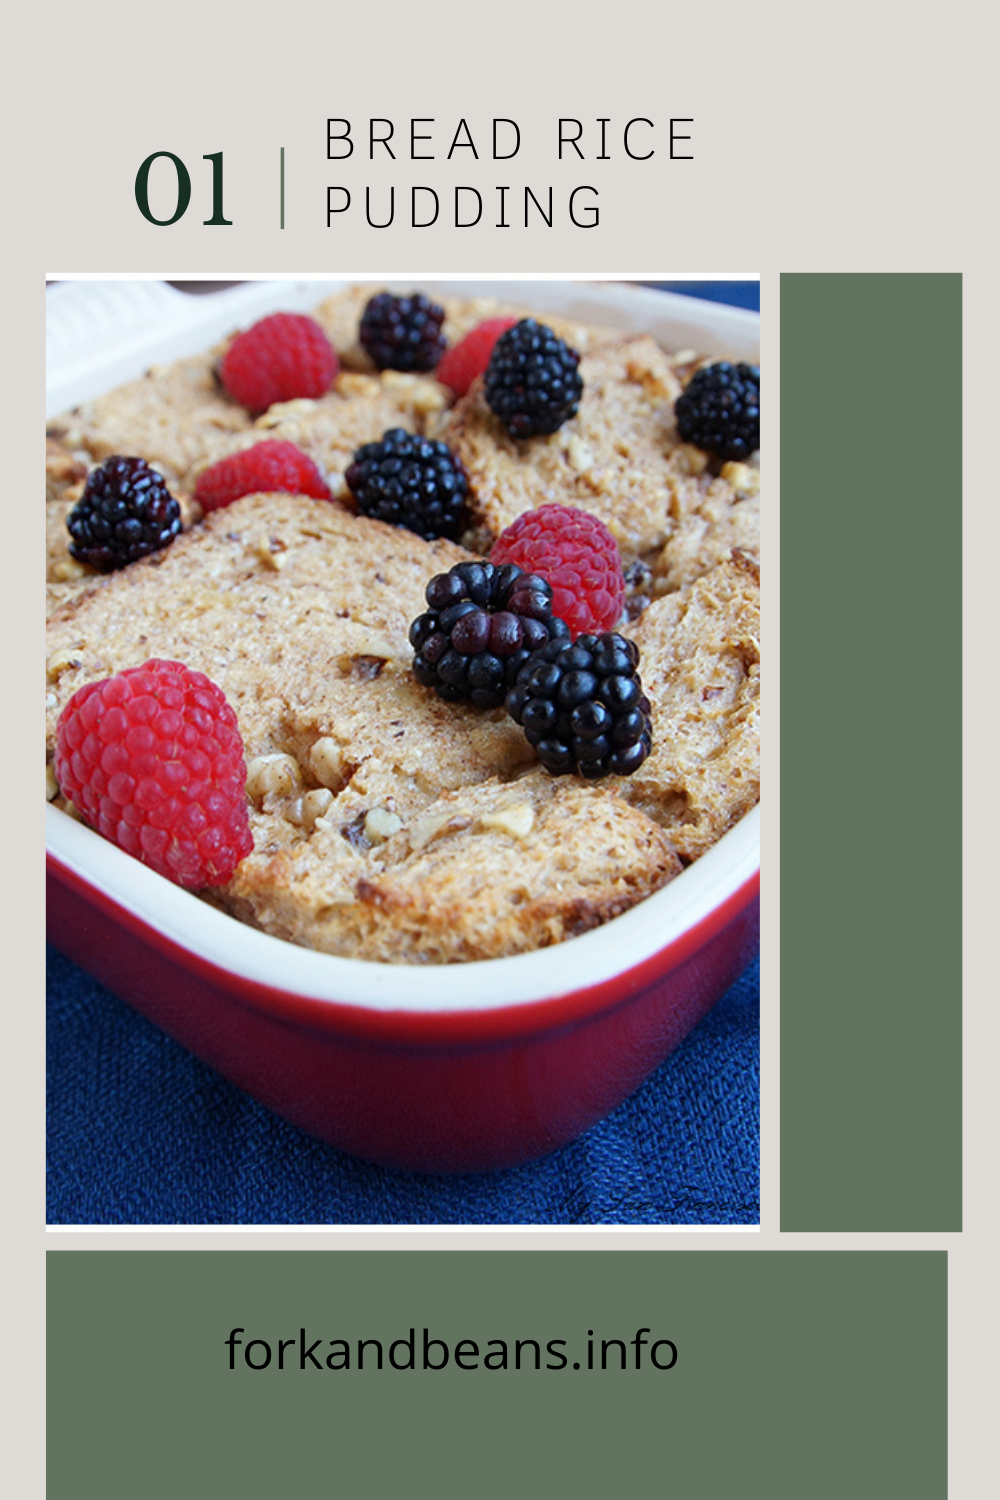 Walnut-studded Whole Wheat Bread Pudding with Blackberry Sauce